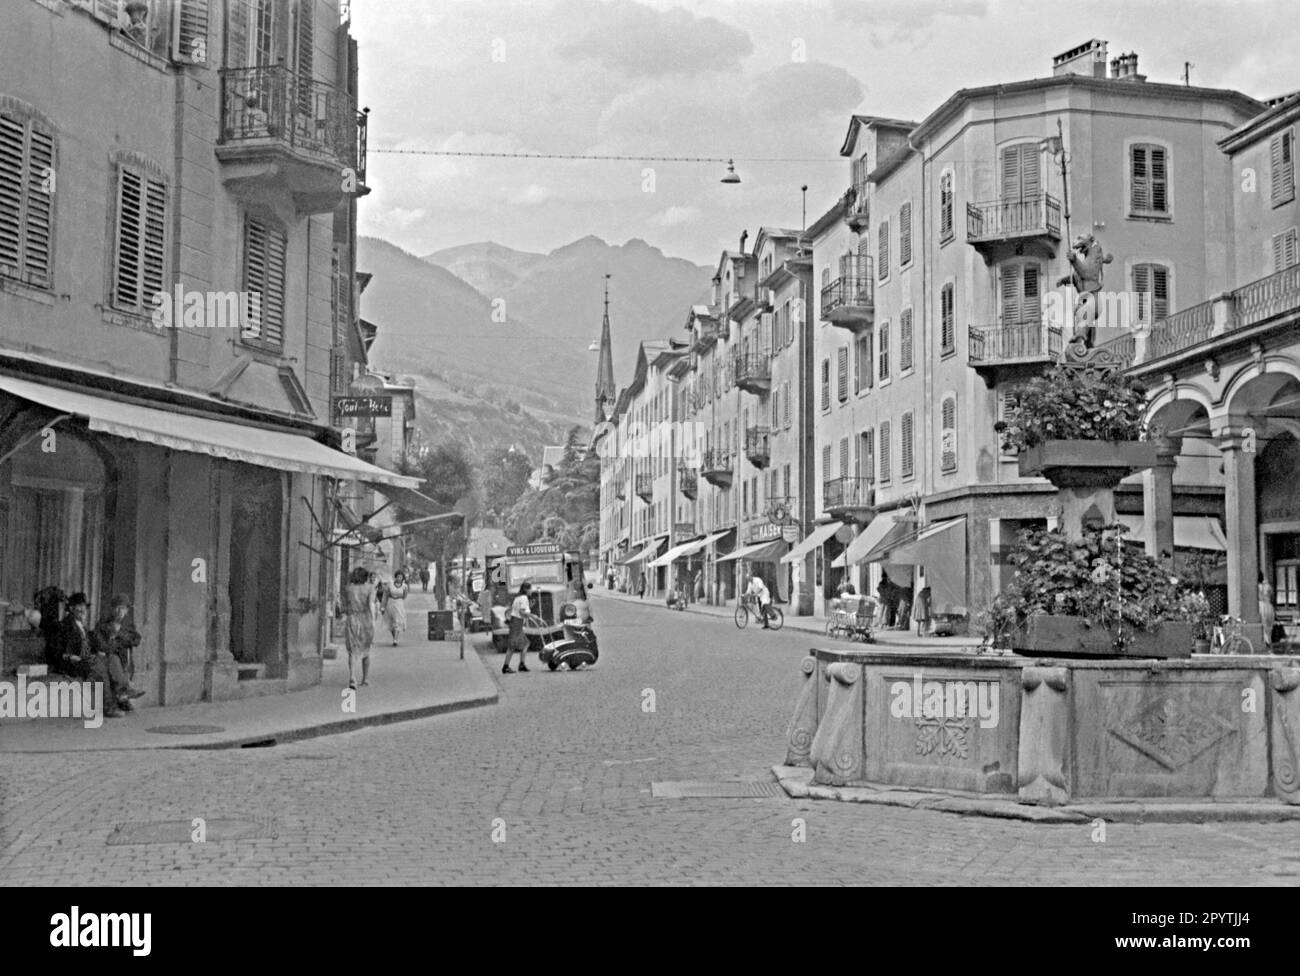 A street scene featuring a fountain in the Old Town, Chur, Graubunder, Switzerland in 1949. The water feature forms a ‘roundabout’ at the convergence of several streets in the town centre. It is capped by a sculpture of a bear holding a standard. Shops are open and shoppers are out and about. A drinks delivery truck is parked in the road. This is from an old amateur black and white 35mm negative – a vintage post-war photograph. Stock Photo